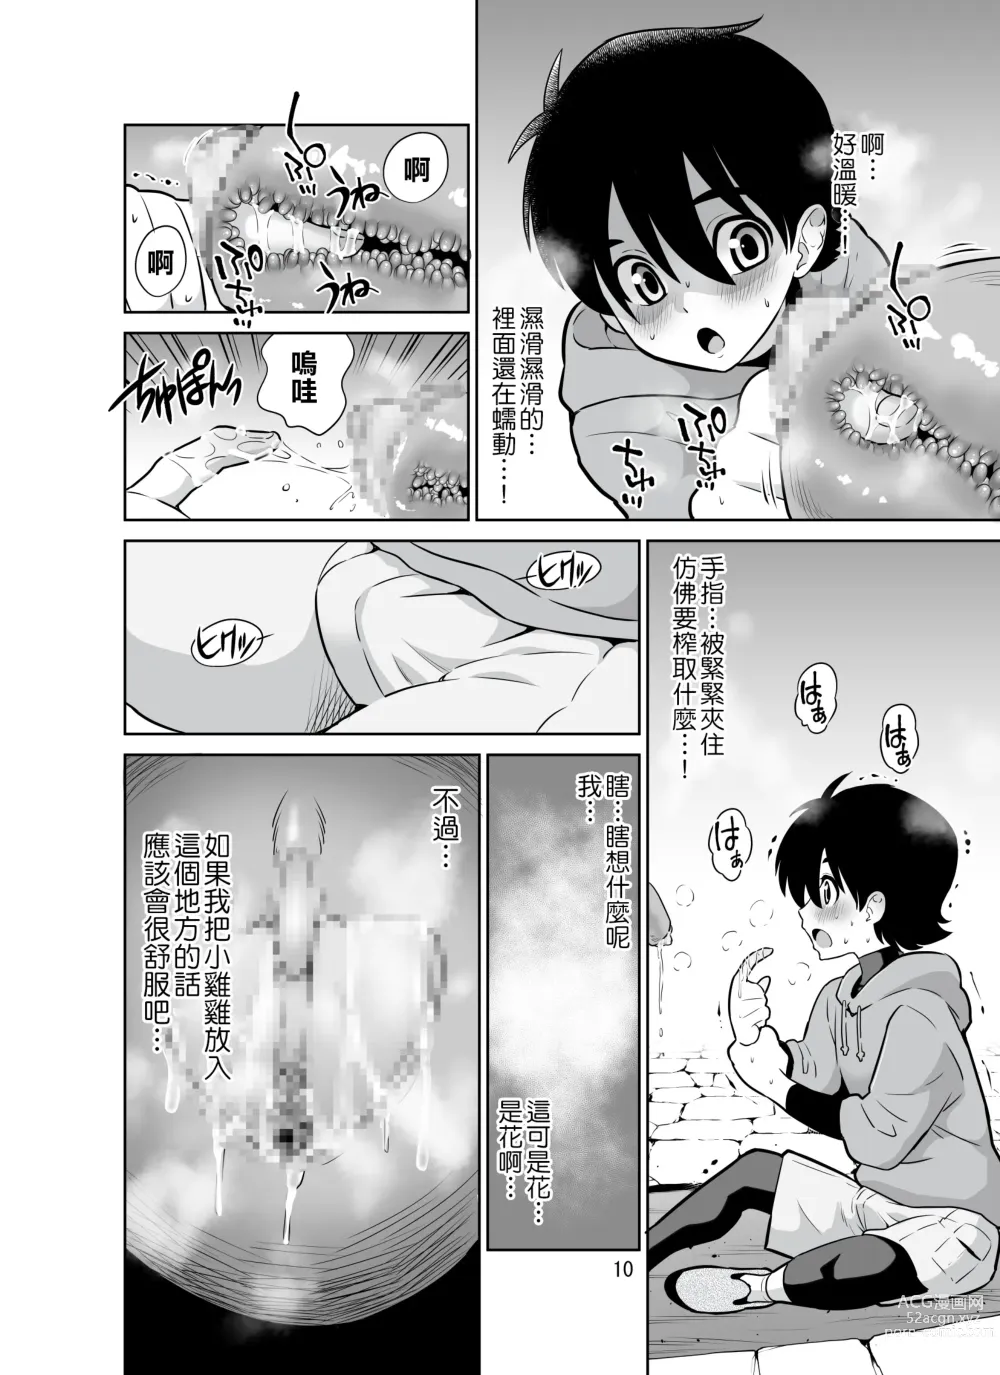 Page 10 of doujinshi 触手花店的大姐姐